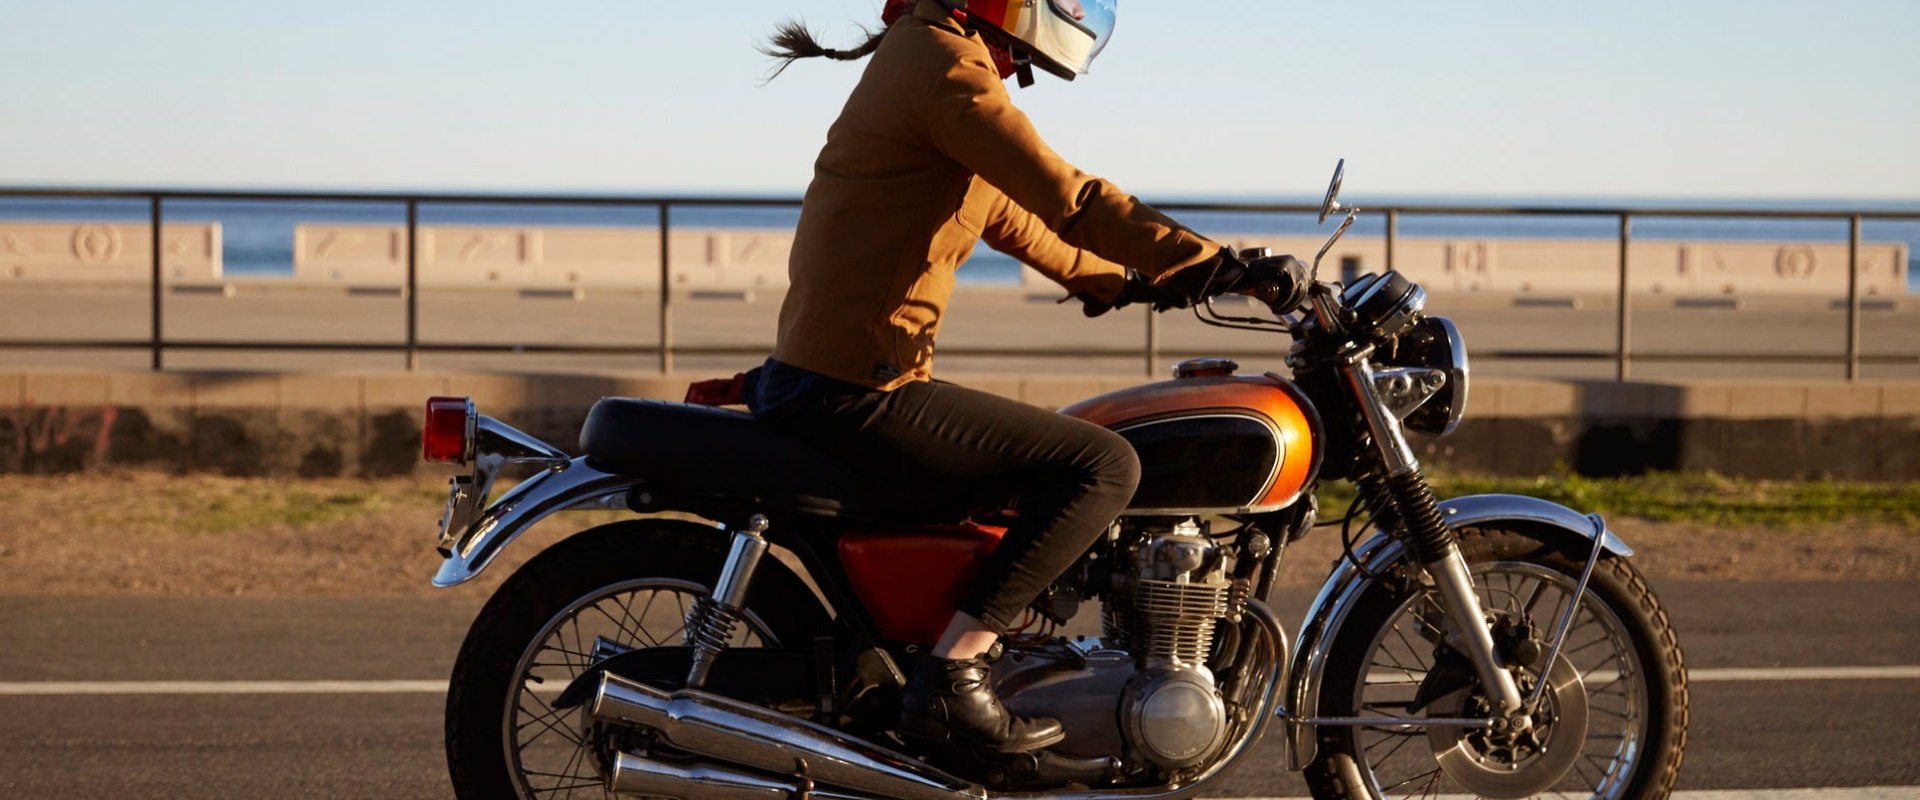 Young Driver Motorcycle Insurance Cost In Florida